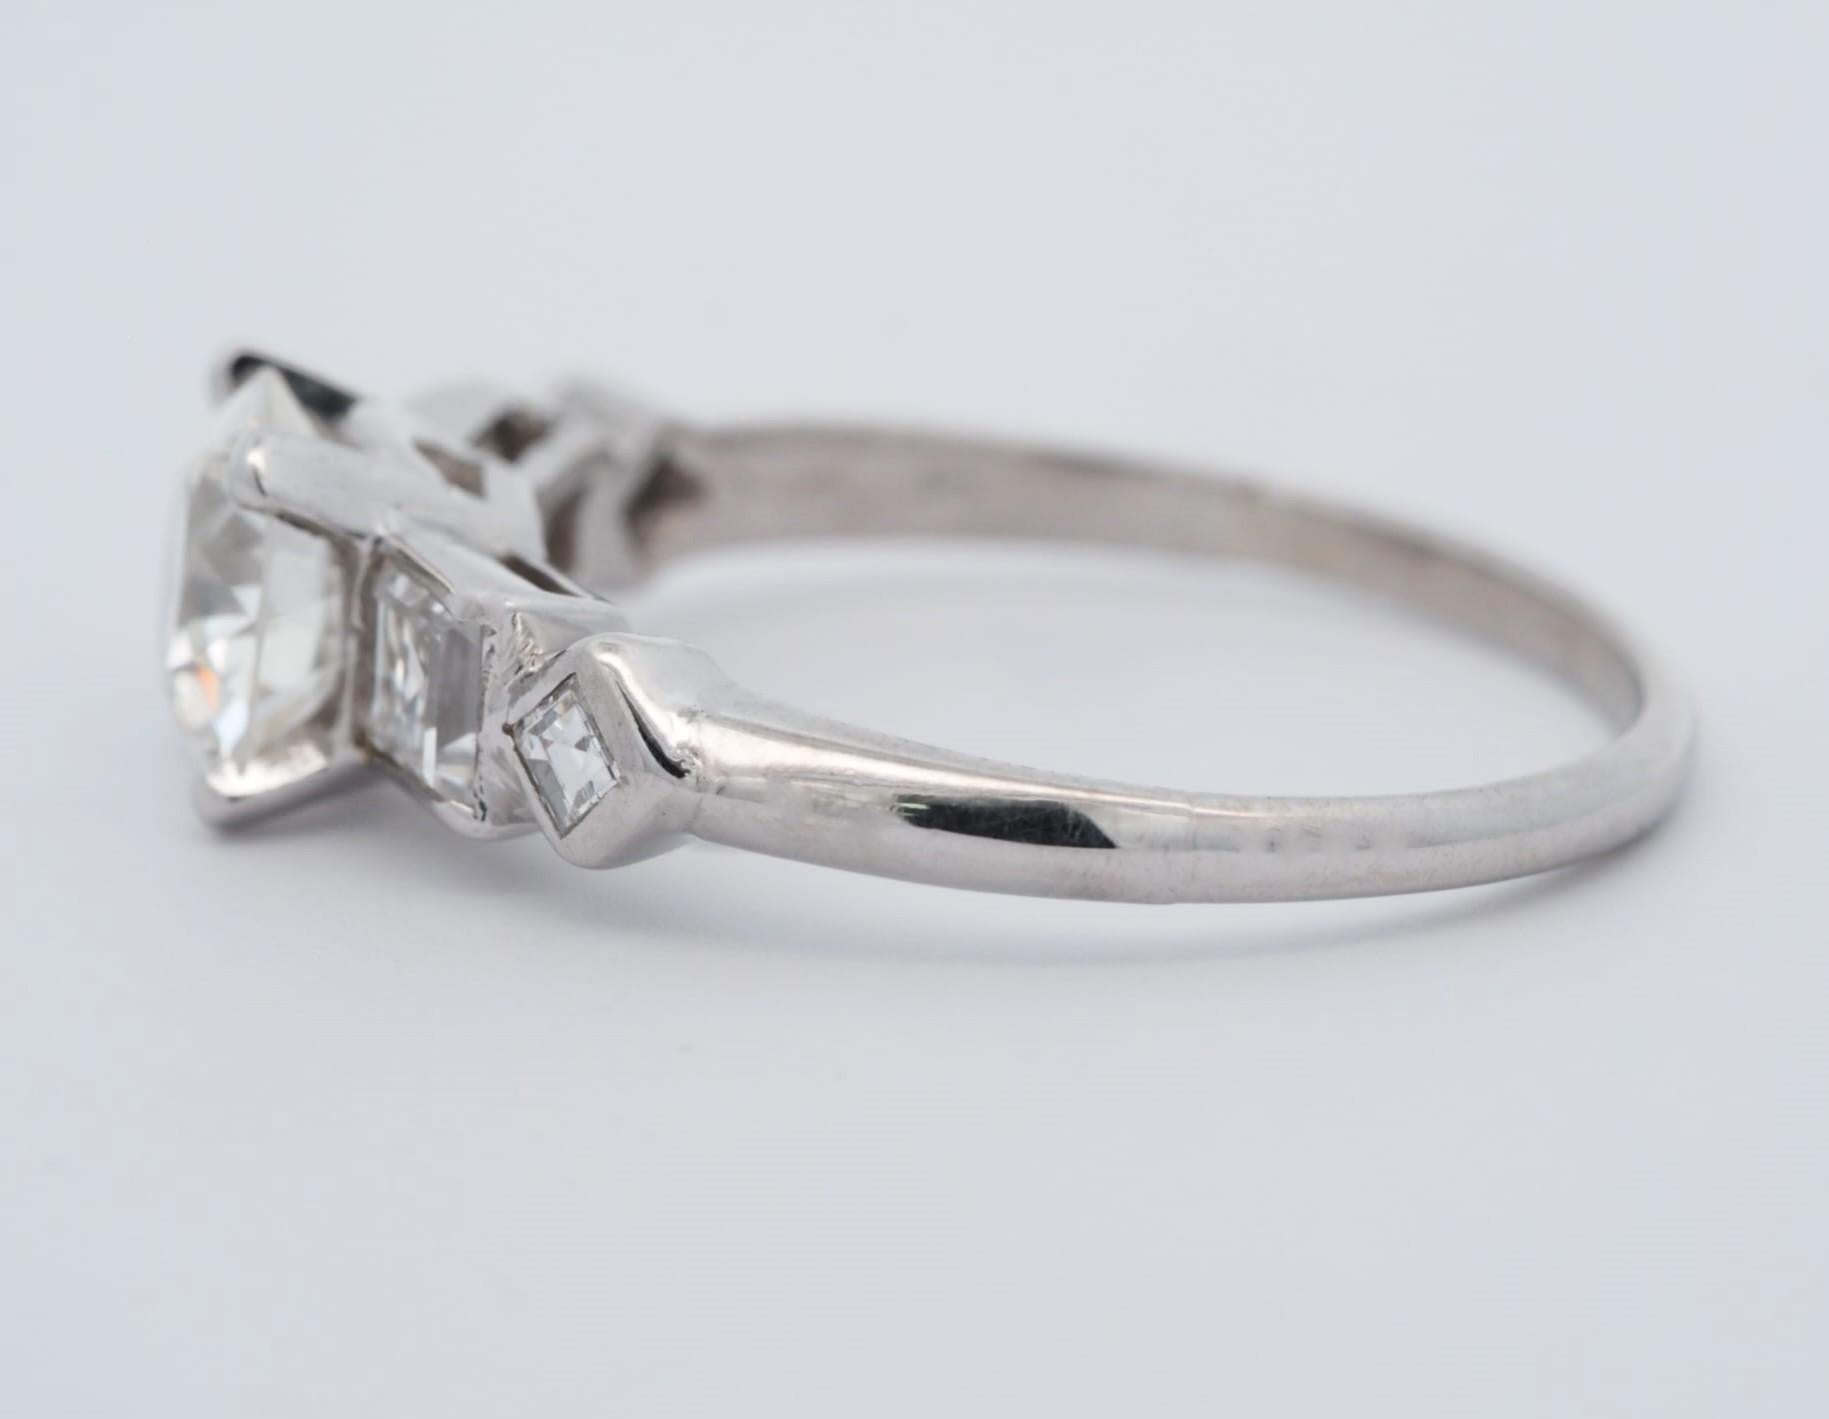 Vintage Platinum 1.12 ct Old European Cut Diamond Engagement Ring In Good Condition For Sale In Addison, TX